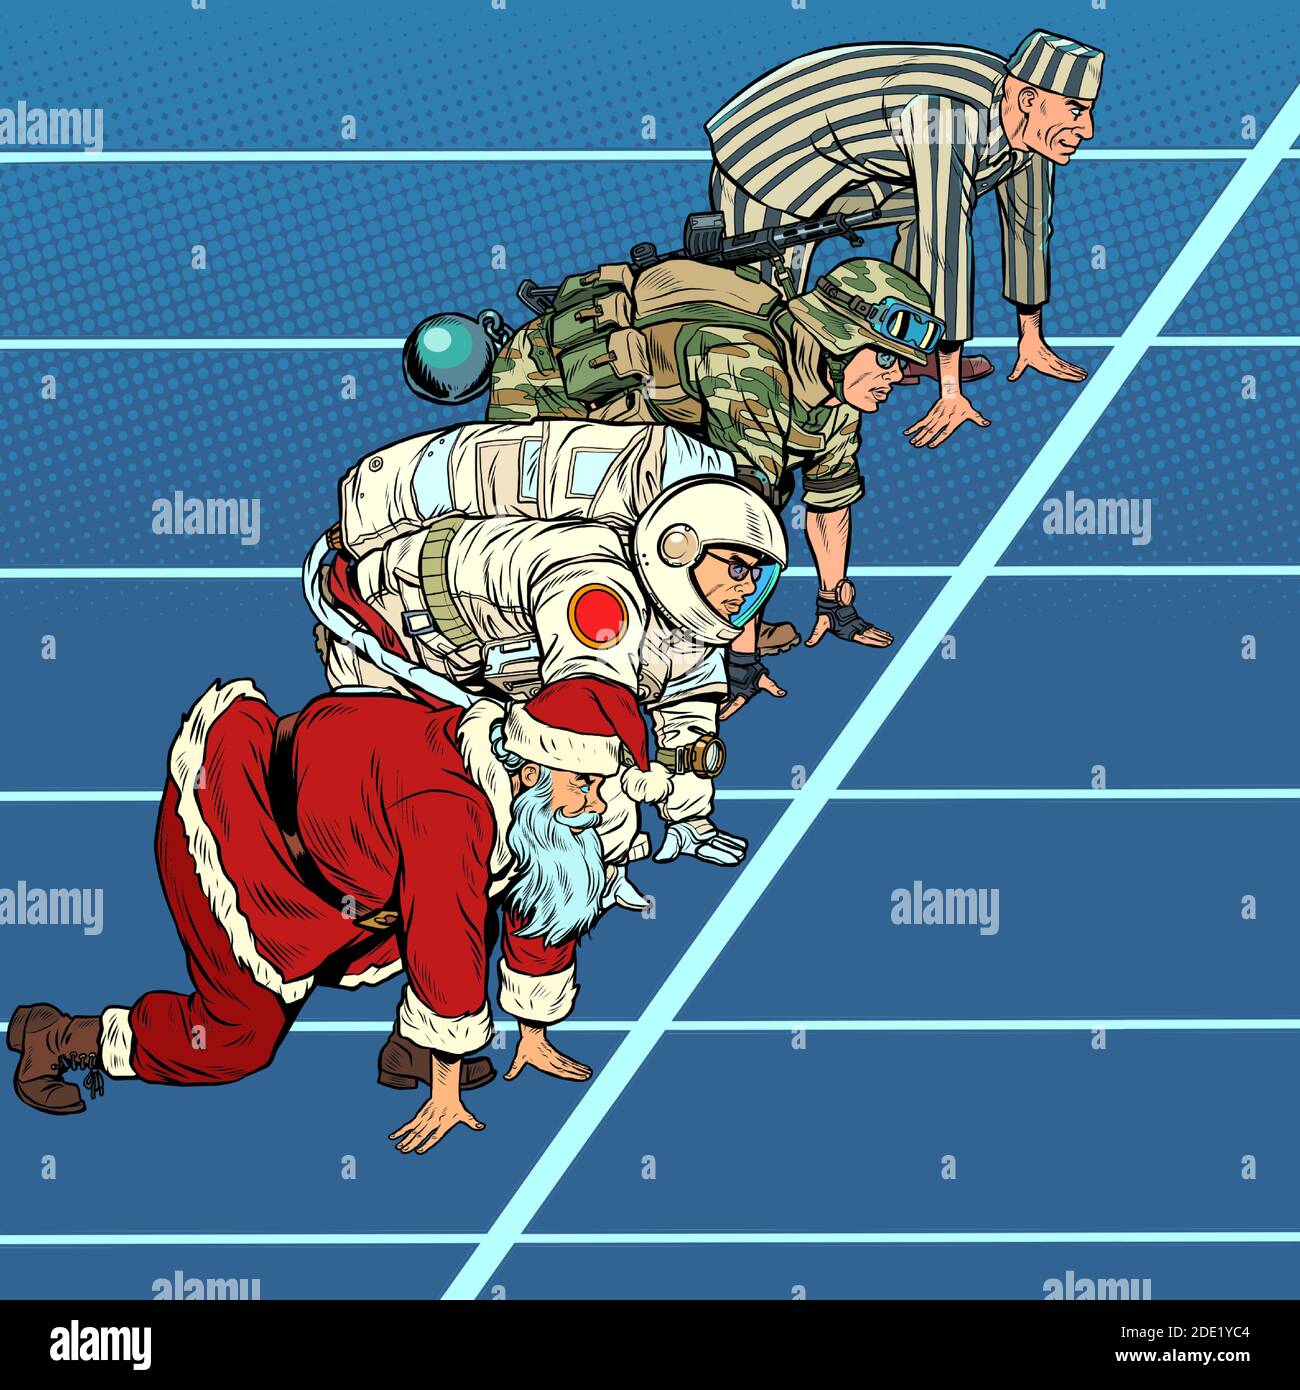 Sports race with Santa Claus military astronaut and prisoner Stock Vector